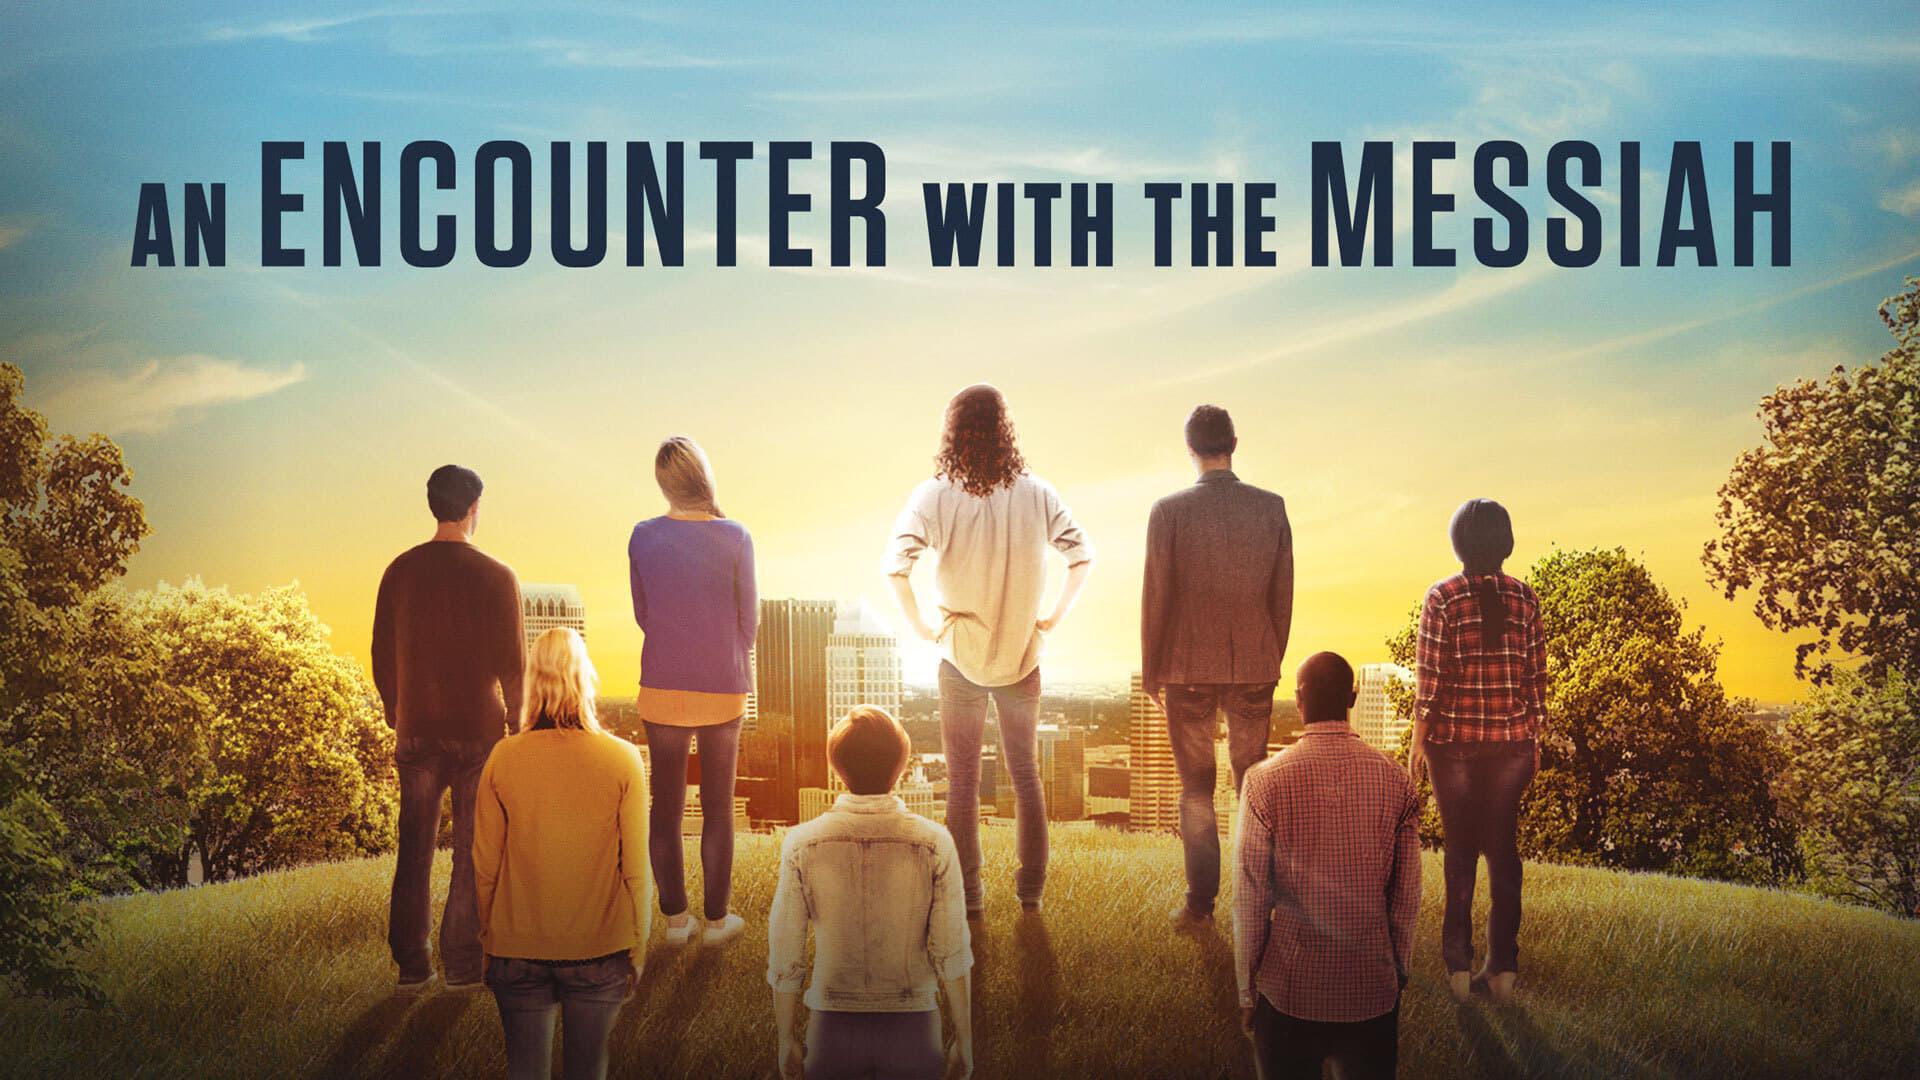 An Encounter with the Messiah backdrop